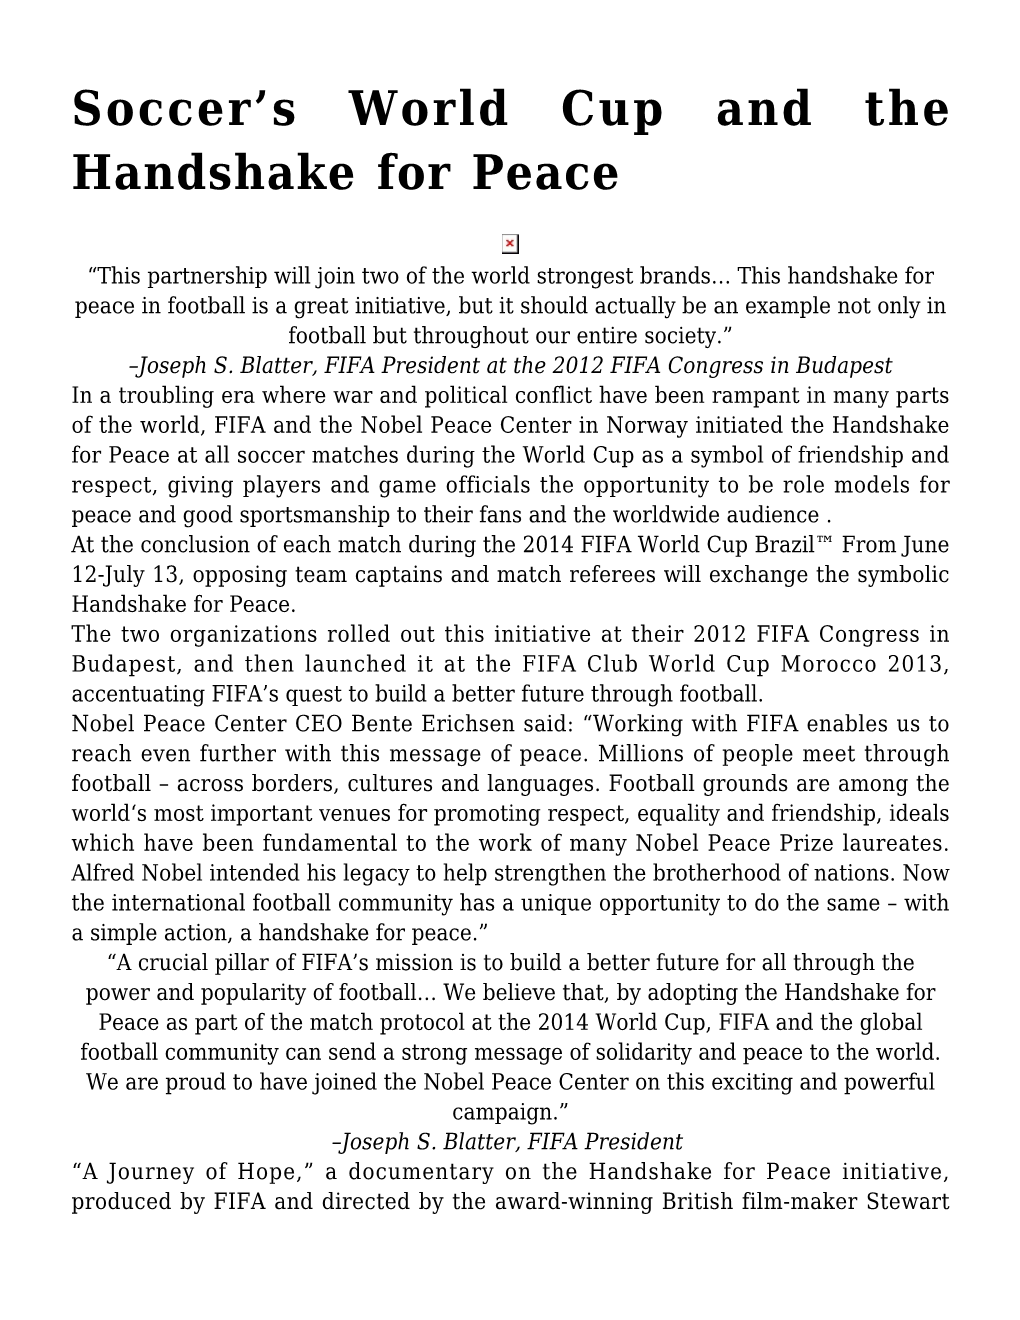 S World Cup and the Handshake for Peace